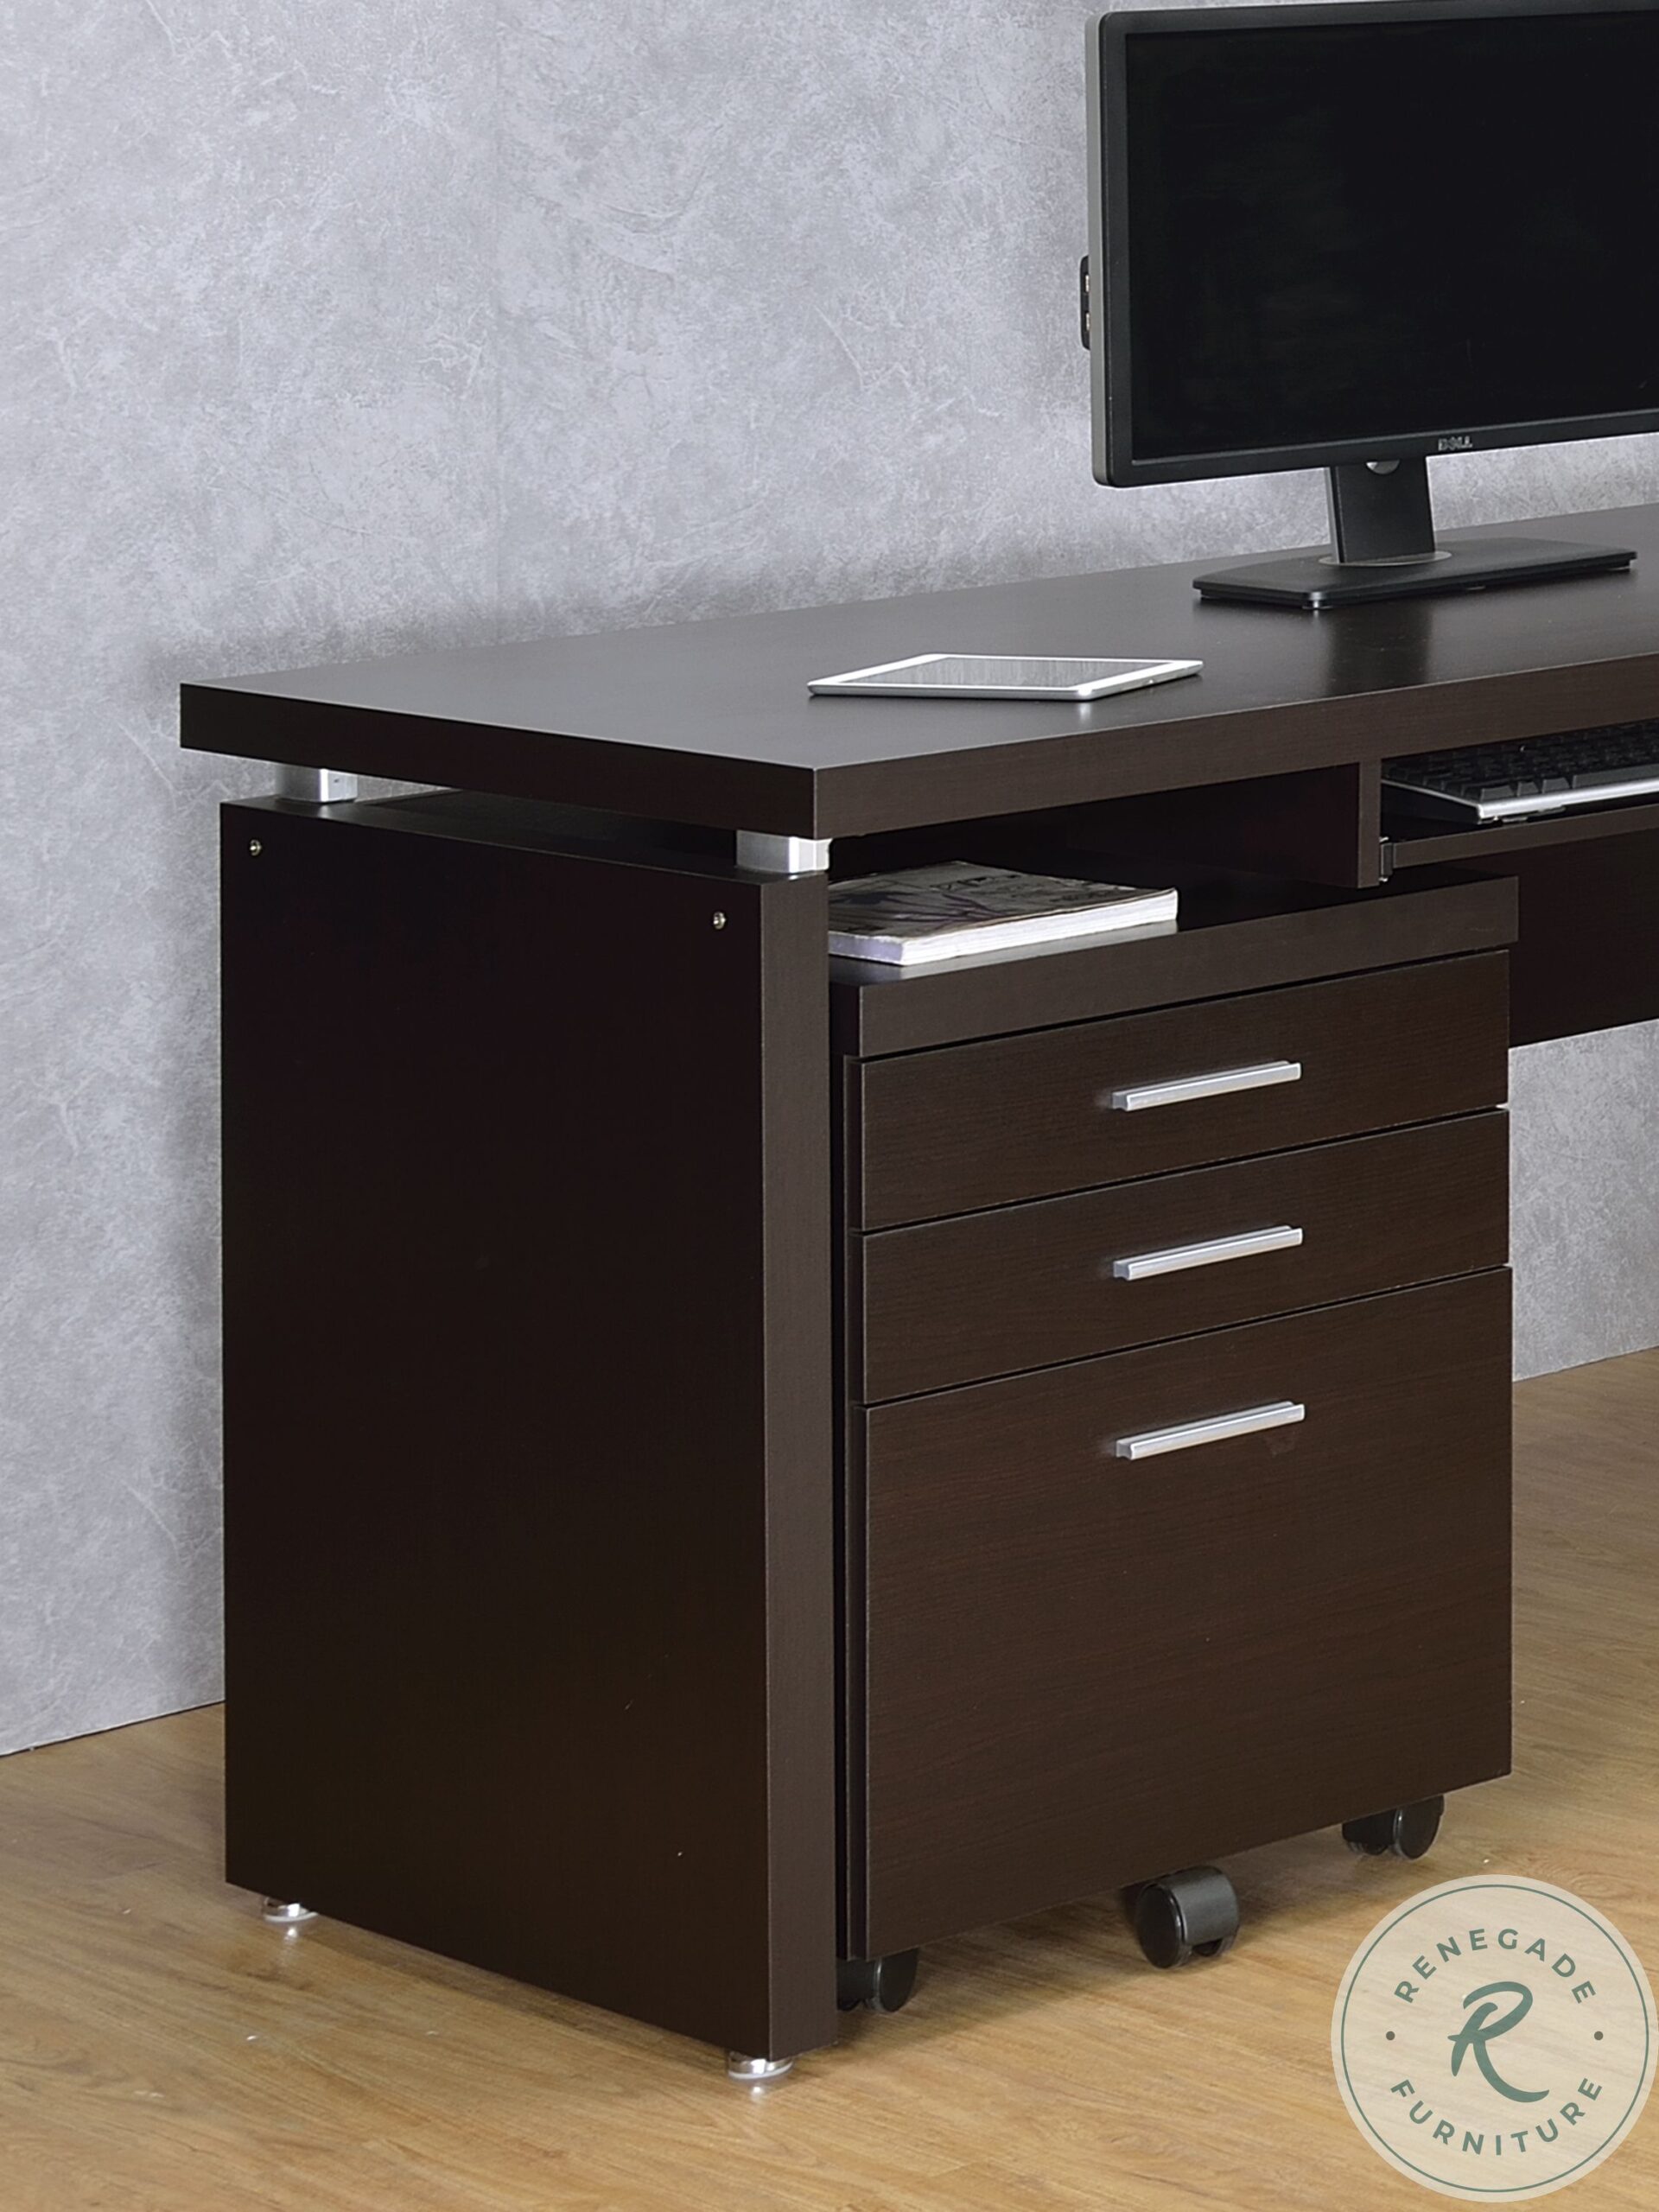 Skylar Cappuccino Mobile File Cabinet7 scaled